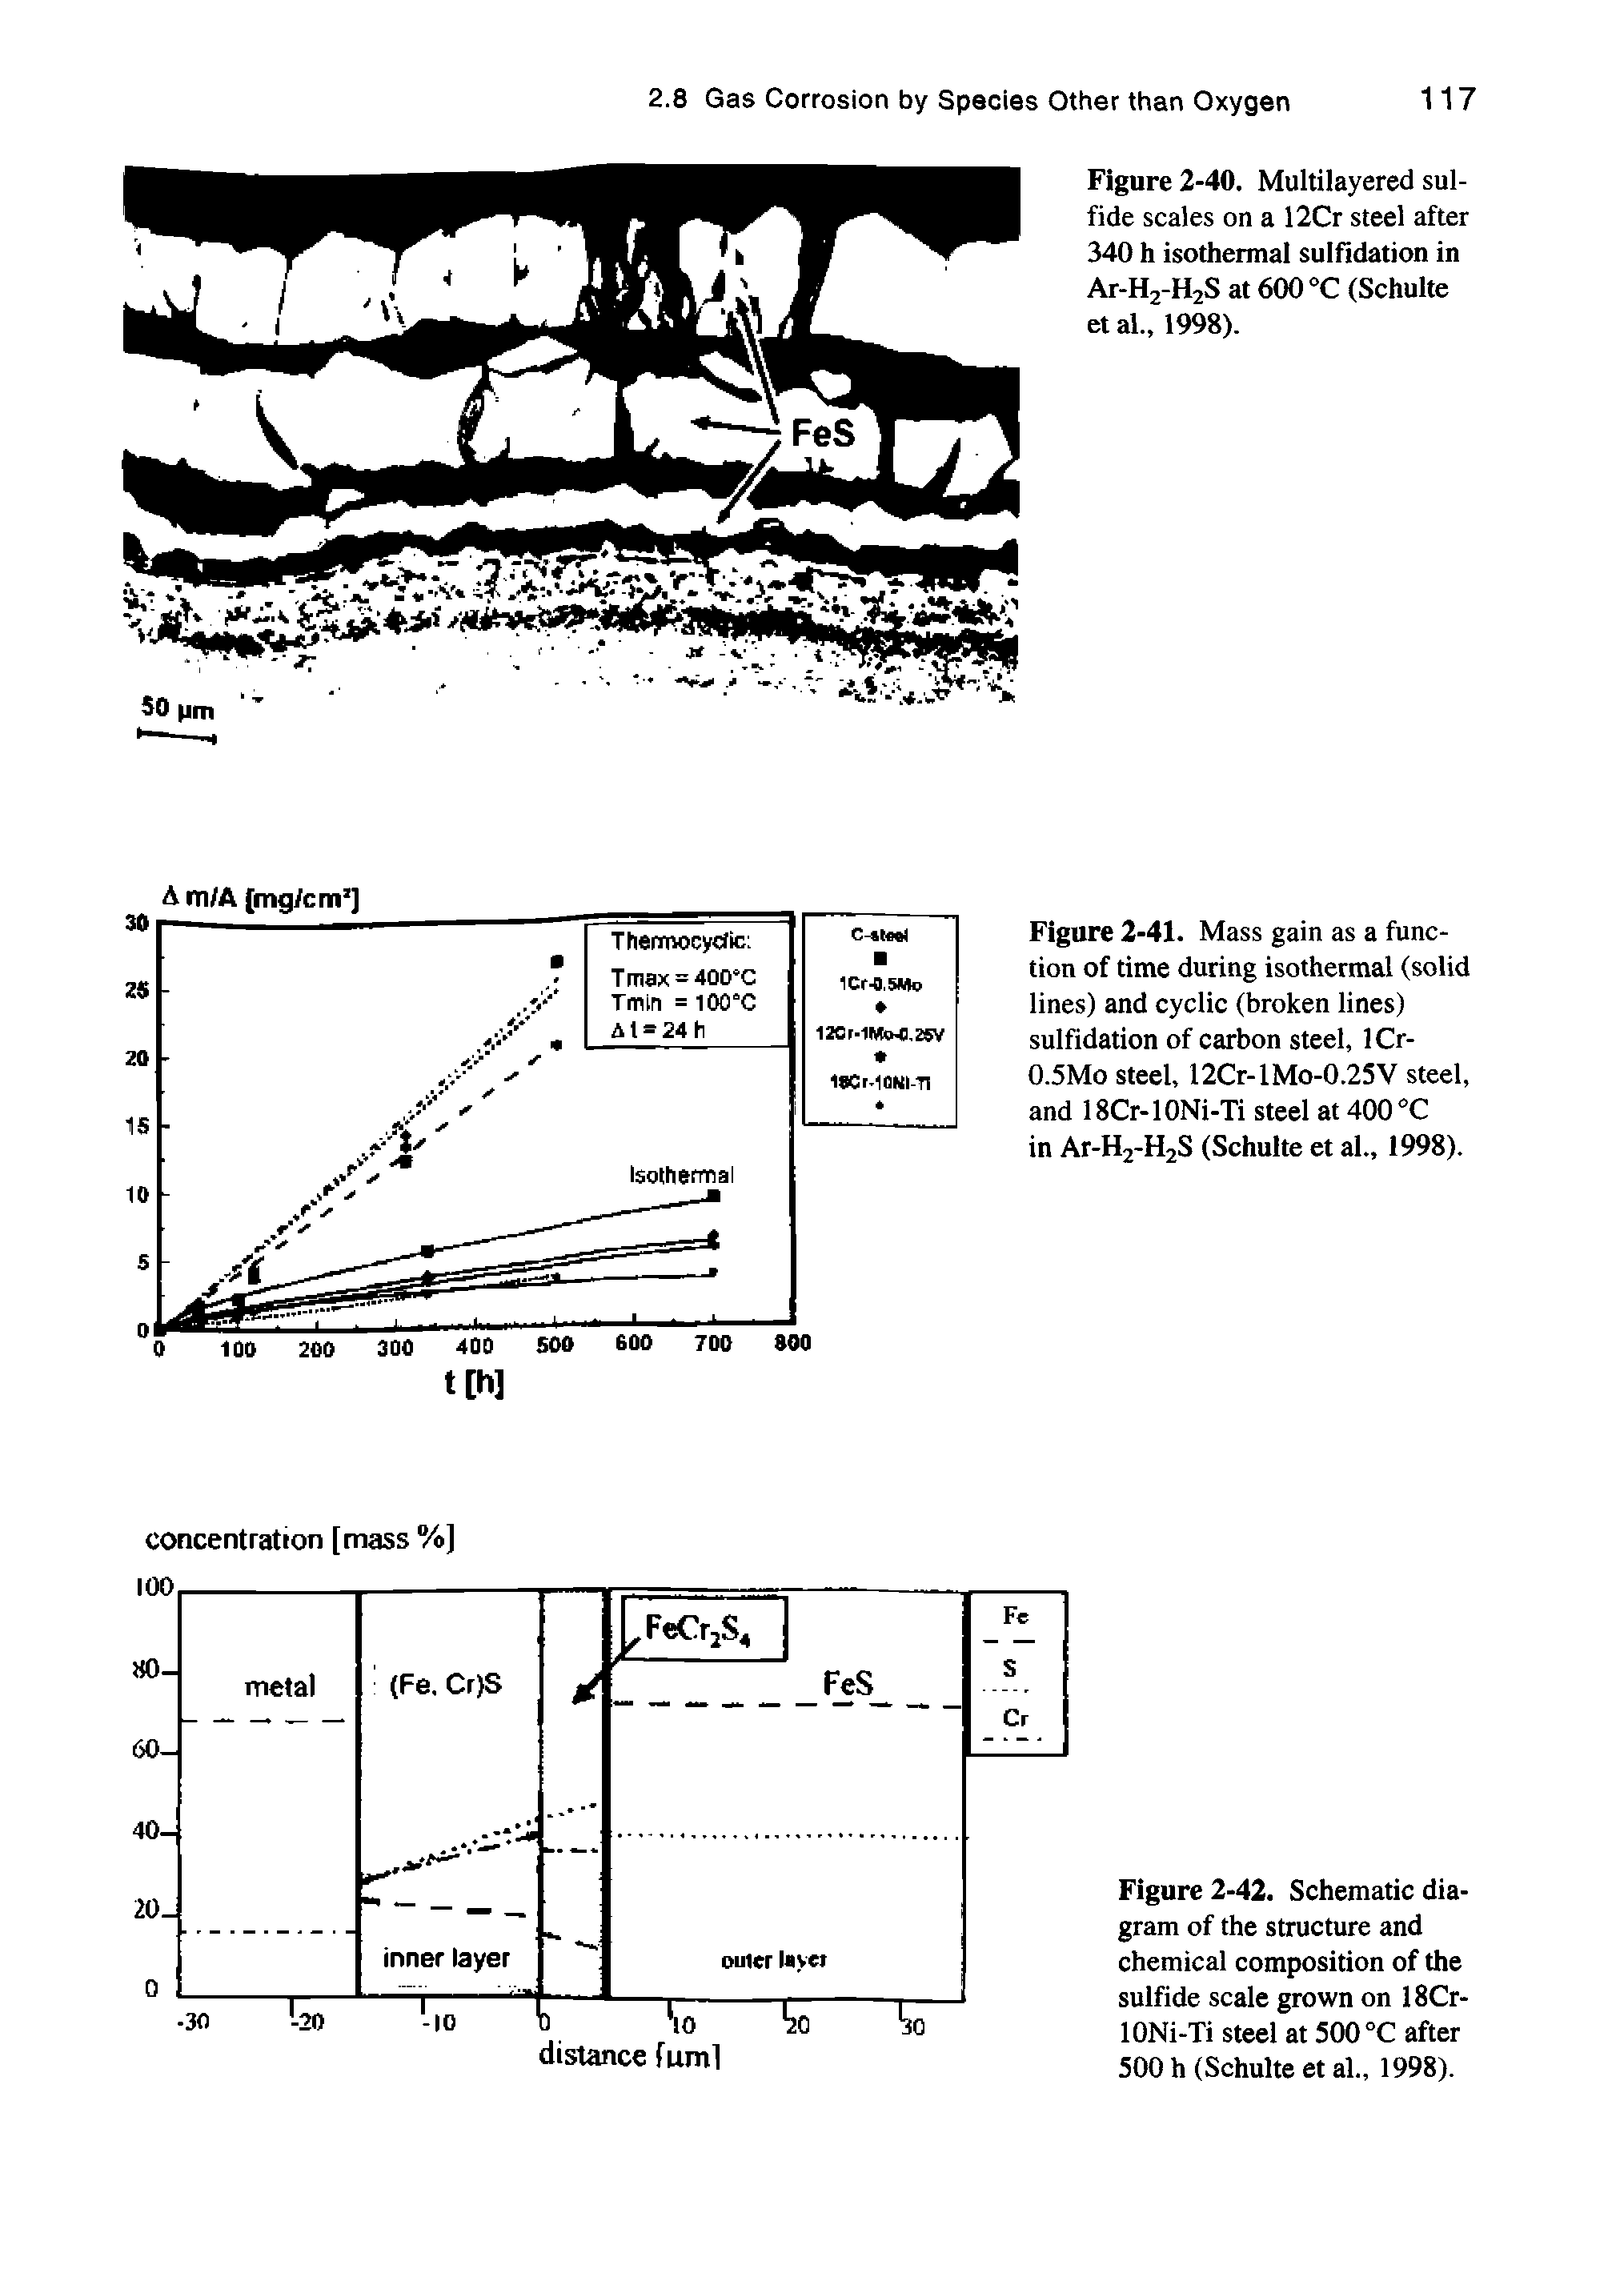 Figure 2-41. Mass gain as a function of time during isothermal (solid lines) and cyclic (broken lines) sulfidation of carbon steel, ICr-0.5MO steel, 12Cr-lMo-0.25V steel, and 18Cr-10Ni-Ti steel at 400 C in Ar-H2-H2S (Schulte et al., 1998).